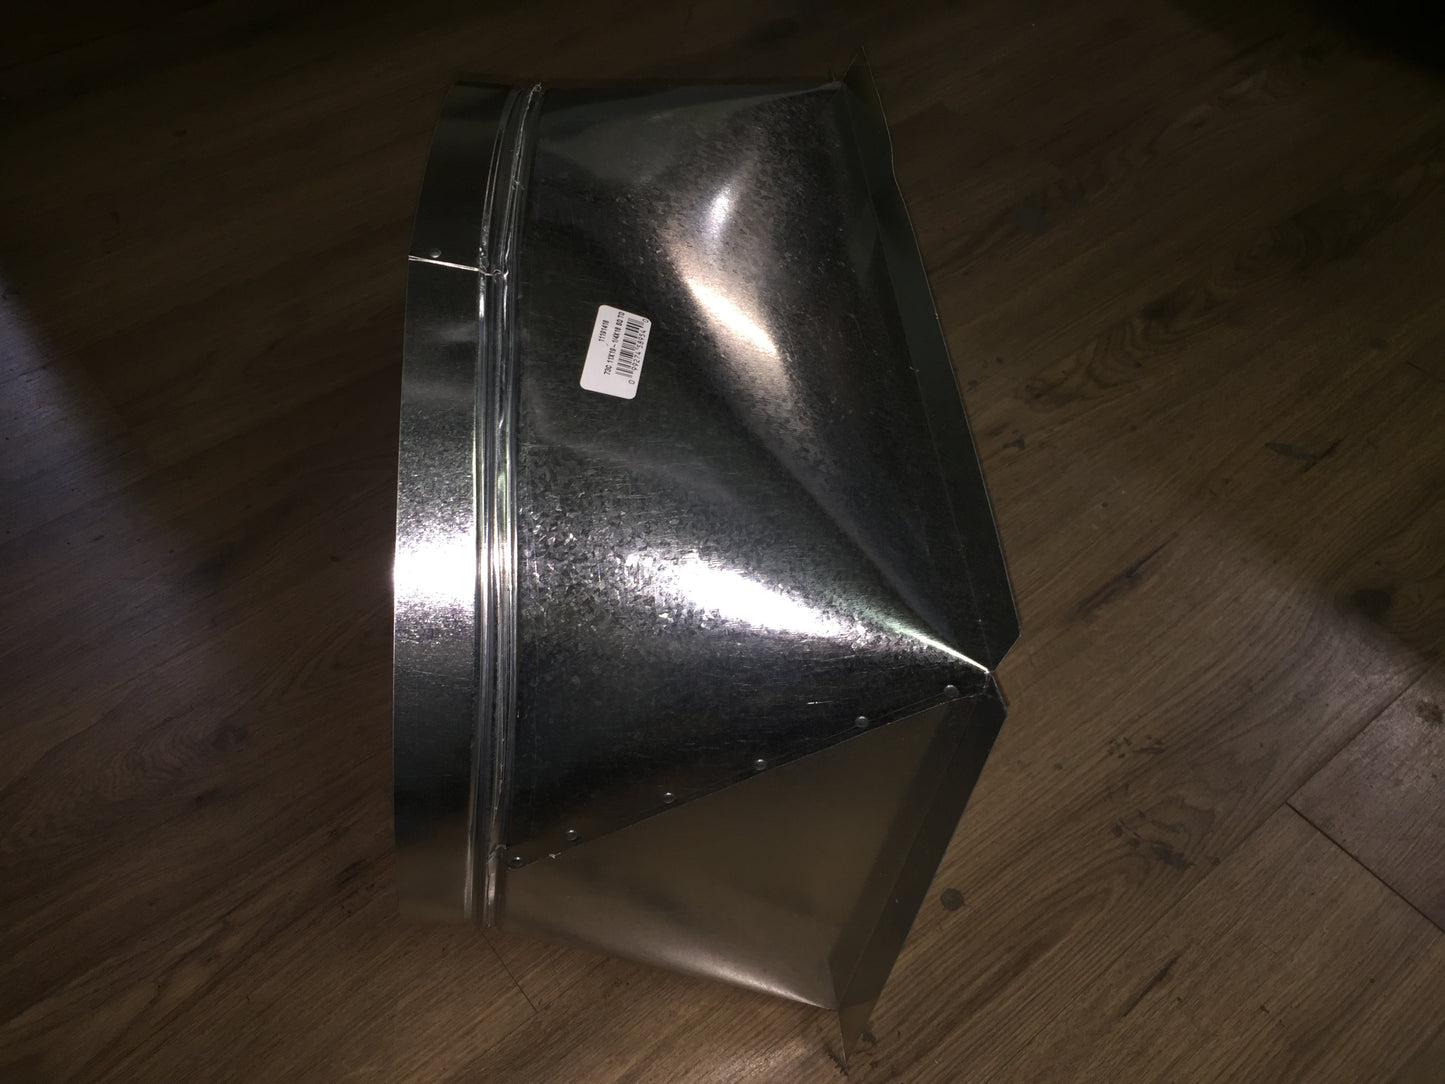 11" X 19-1/4" X 18" SQUARE TO ROUND BOOT ADAPTER 